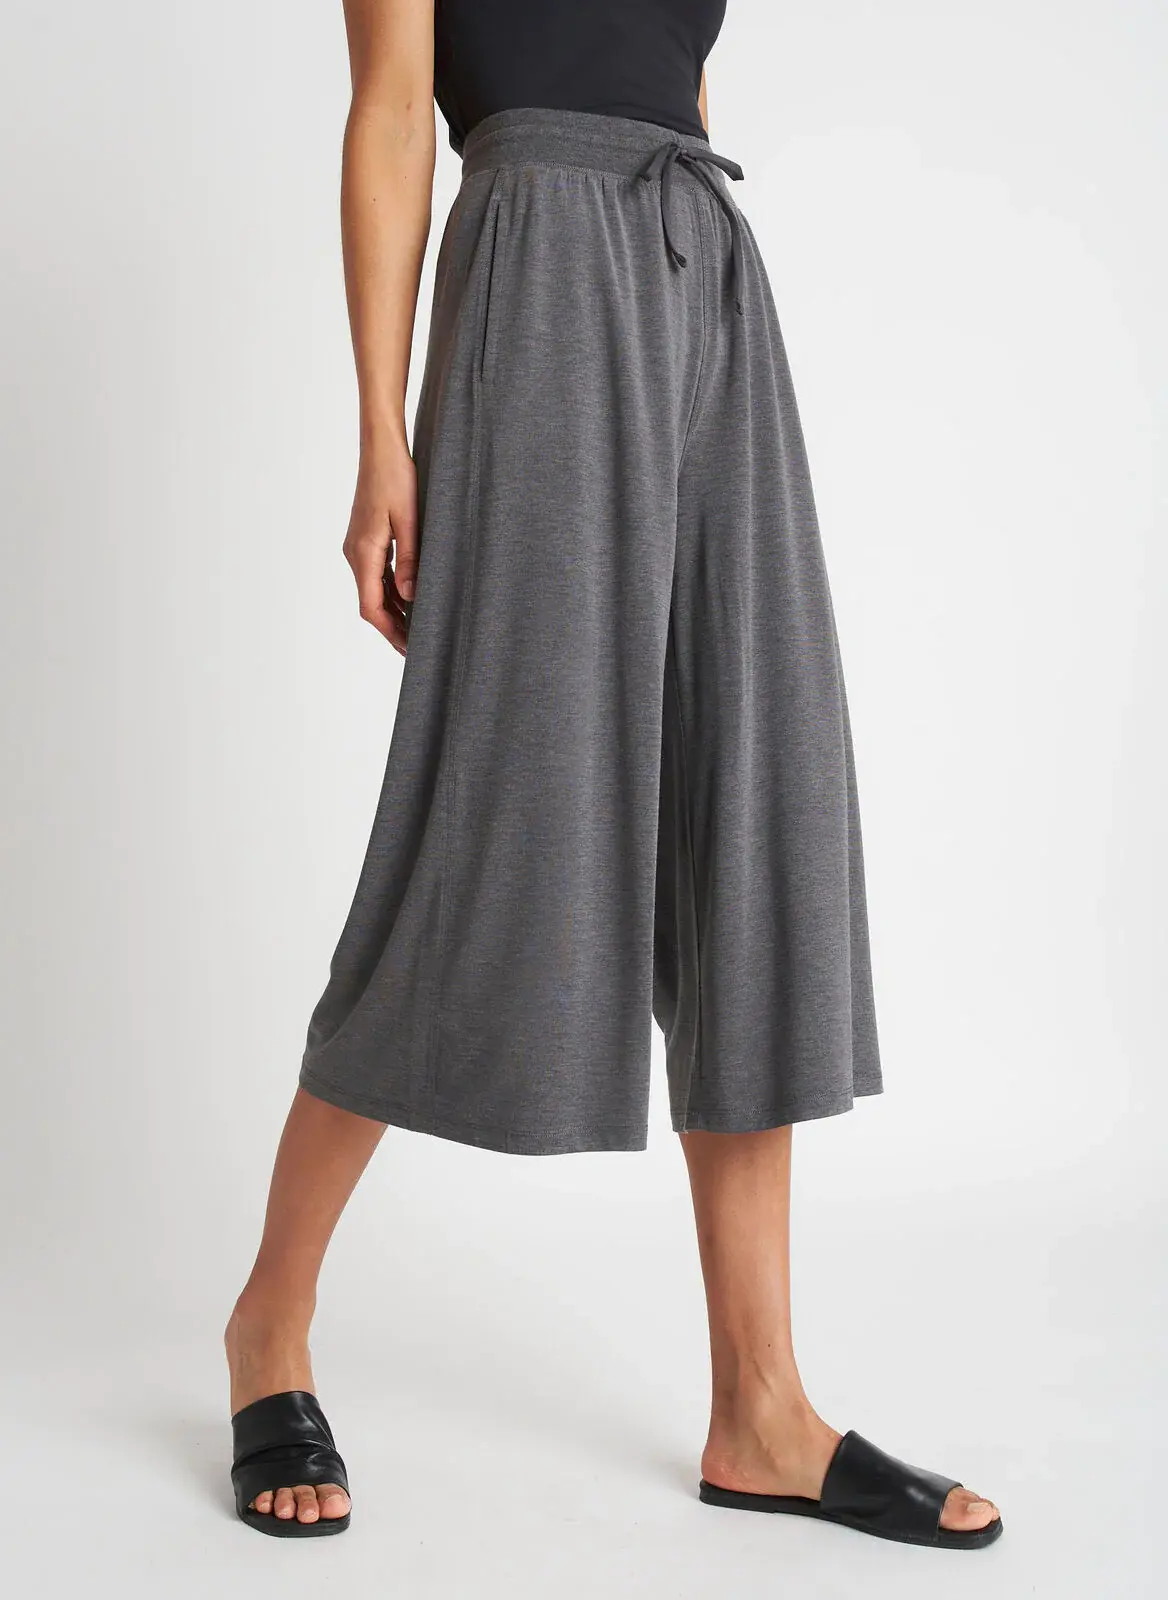 Kit And Ace At Ease Culottes. 1